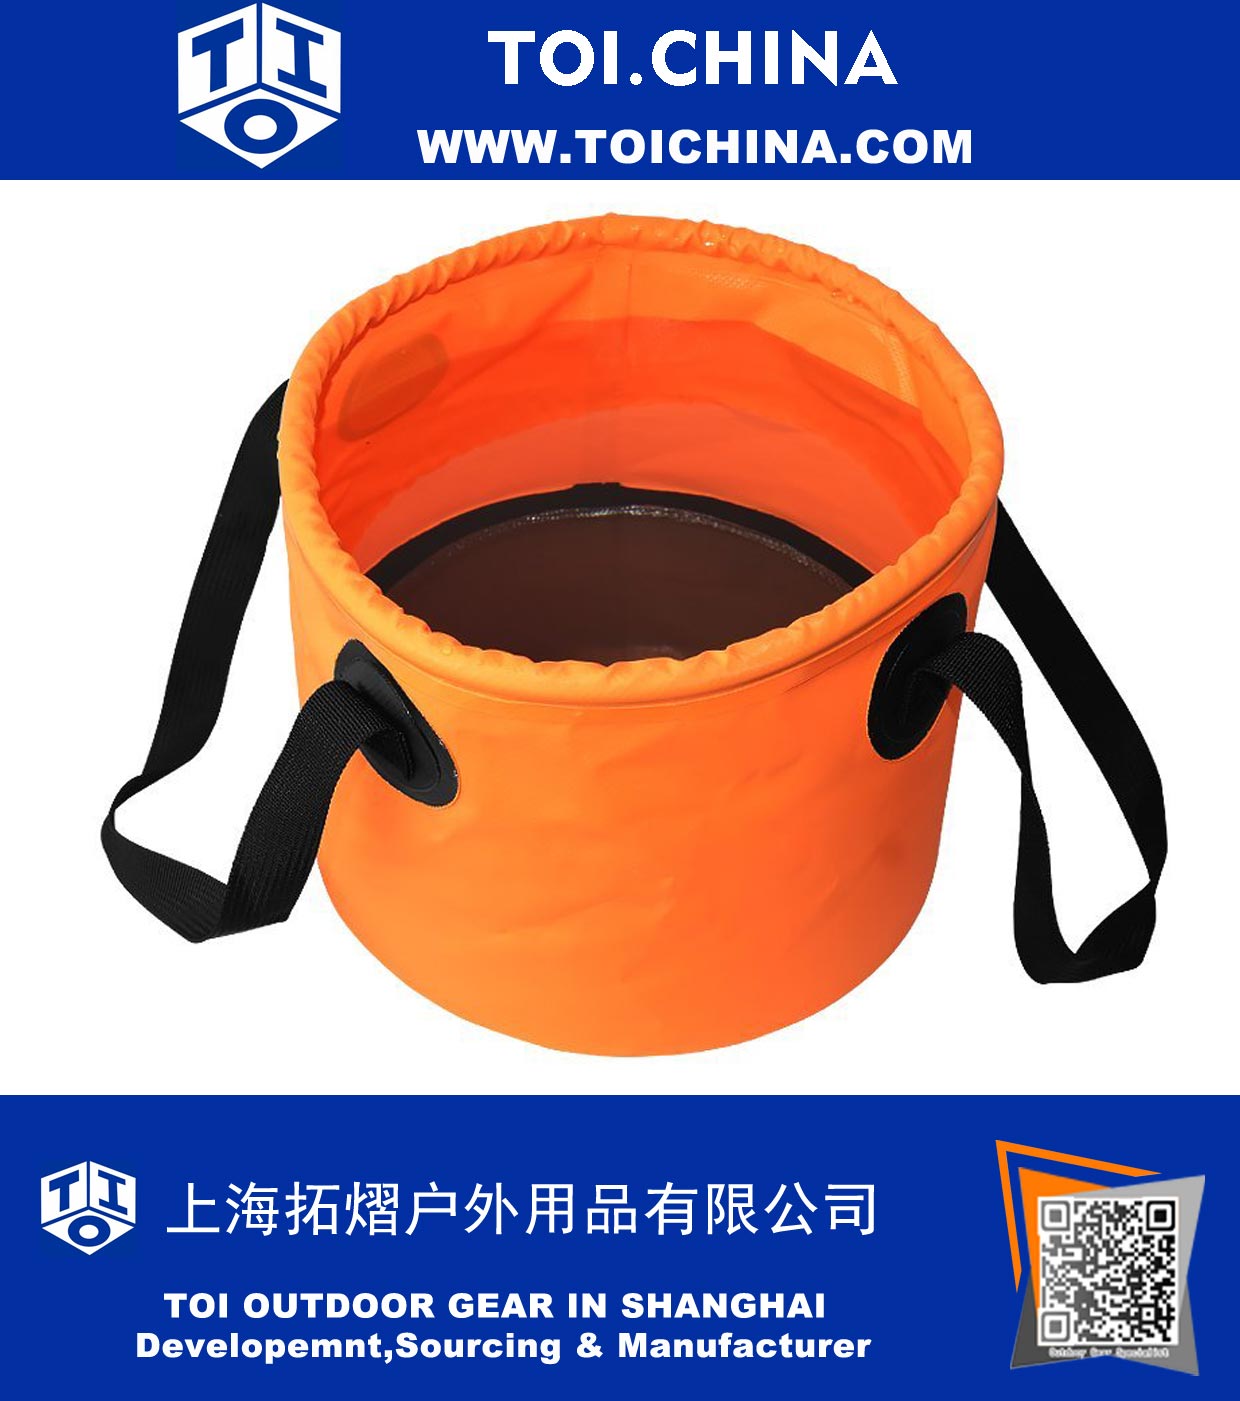 Compact Collapsible Bucket for Camping, Travel and Gardening , Portable Folding Water Container Wash Basin Water Container Pail, Lightweight & Durable.